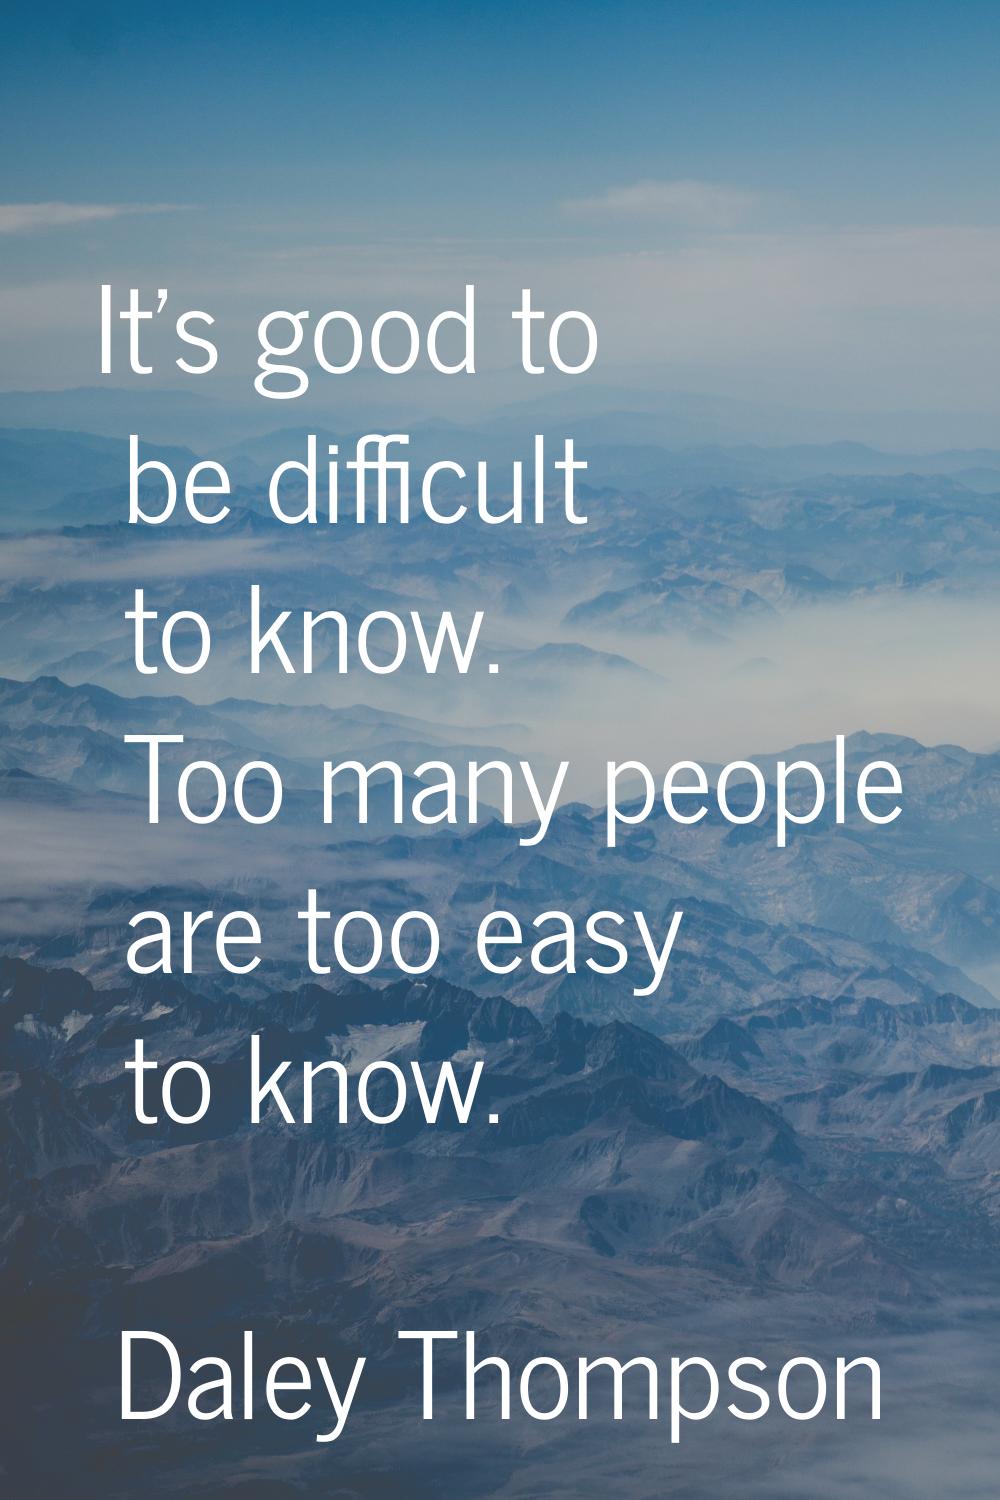 It's good to be difficult to know. Too many people are too easy to know.